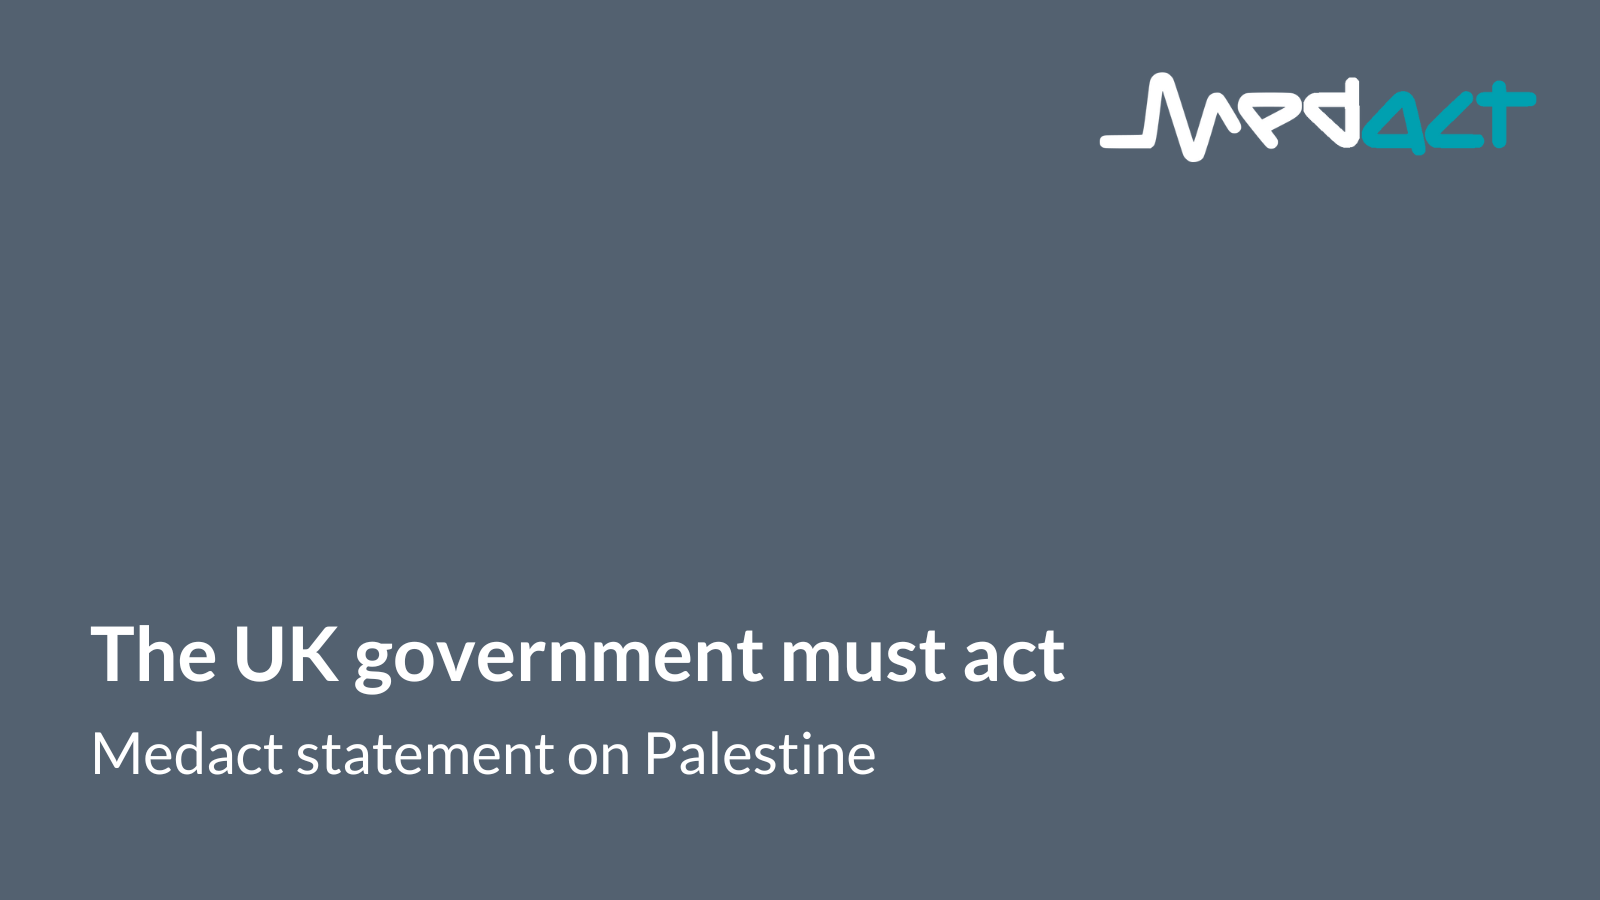 The UK government must act! Medact statement on Palestine